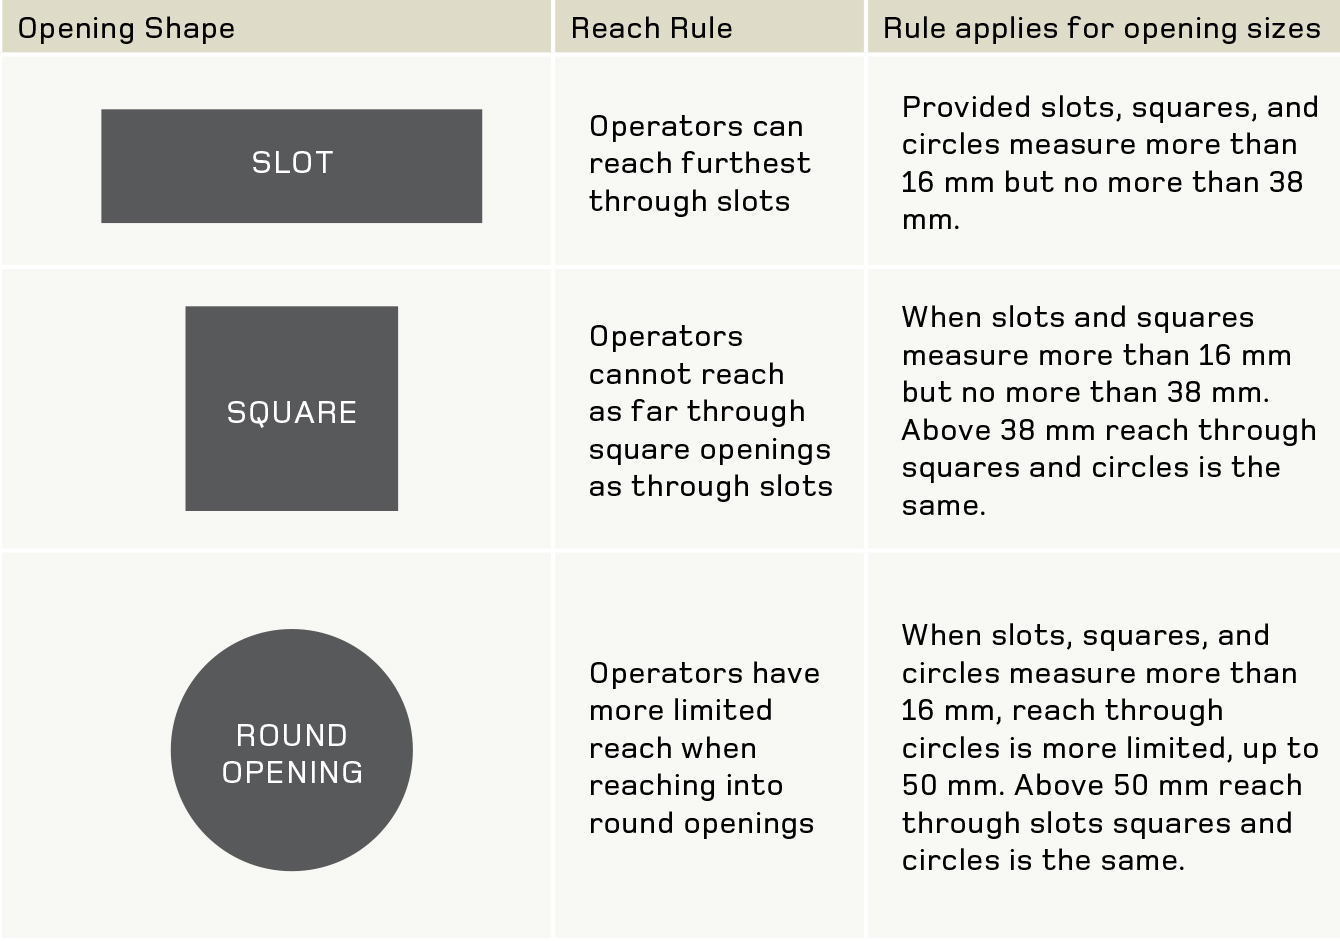 [image] table 2: Reach rules for openings of various shapes